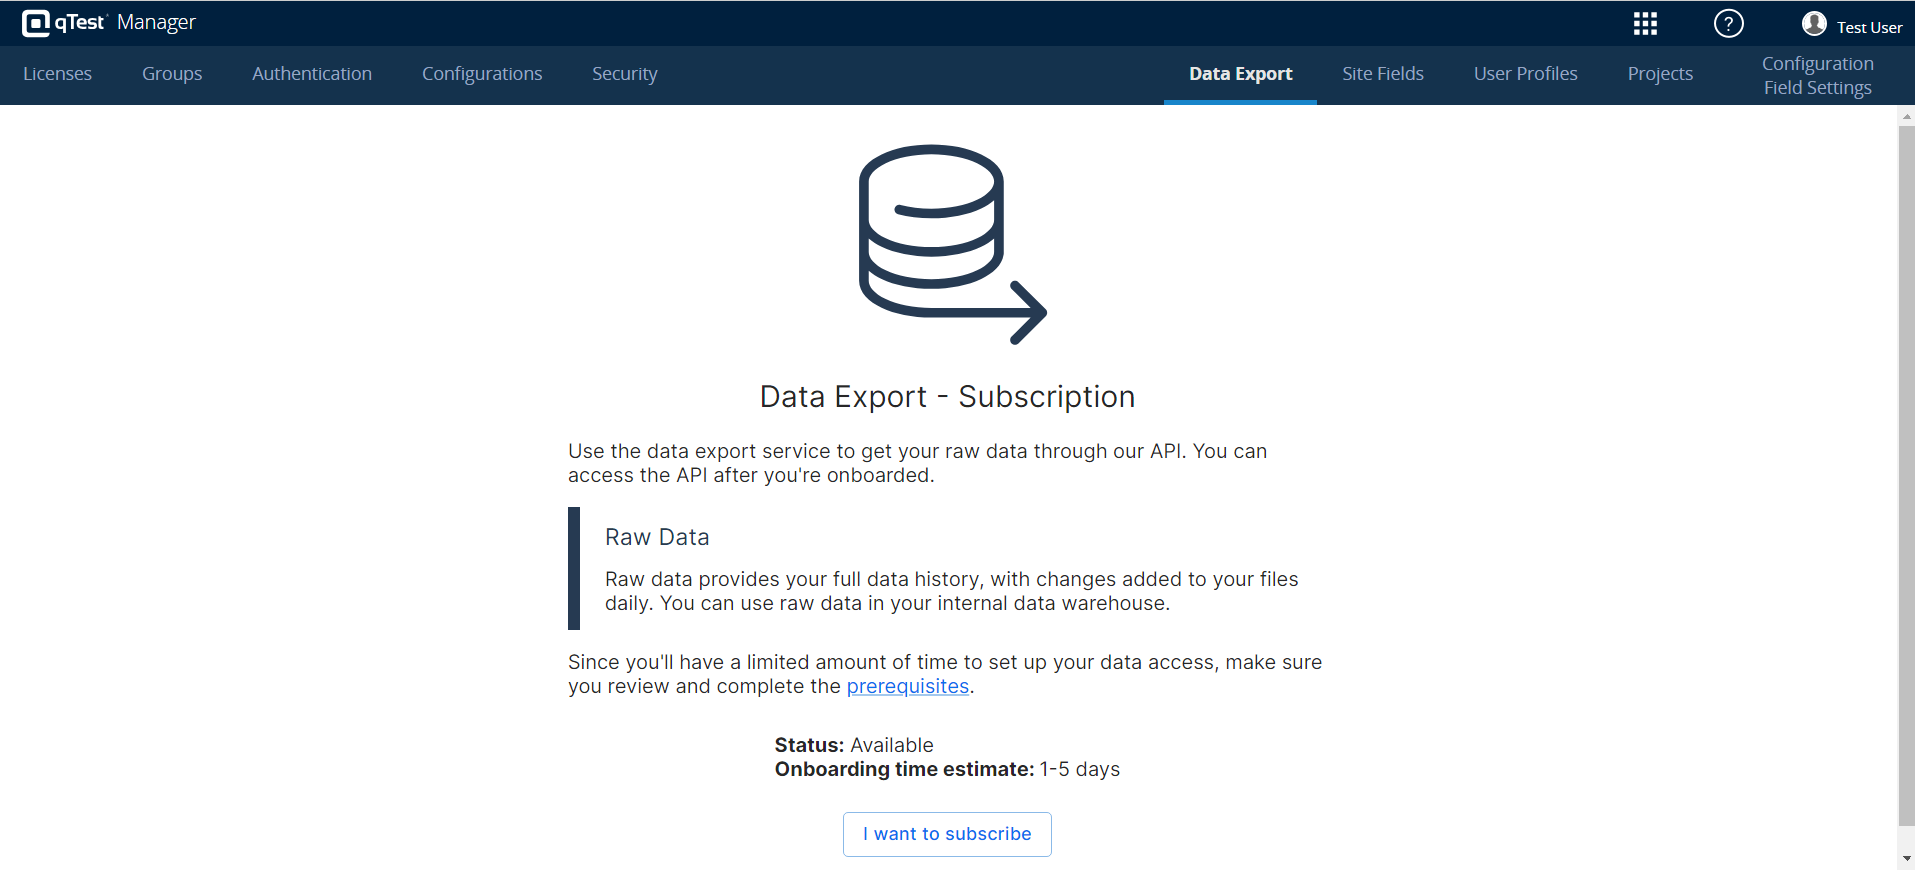 qTest administrators can get organizations started with qTest Data Export within the Administrator settings